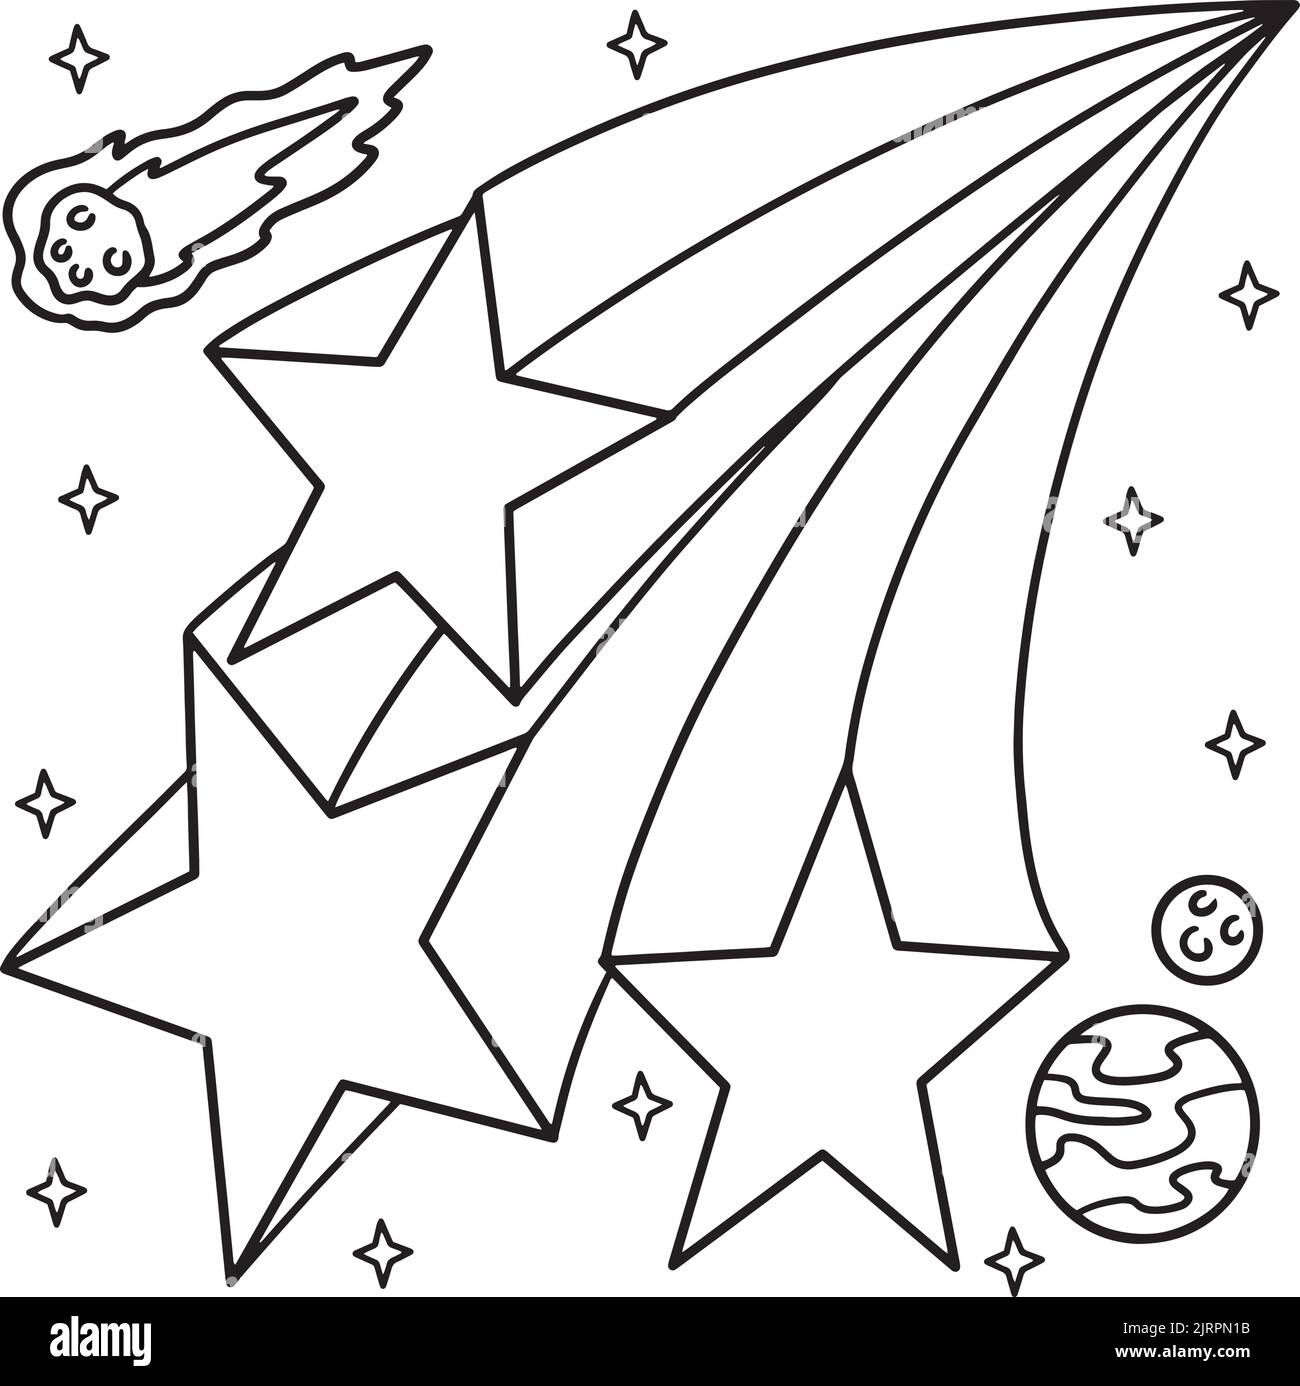 Shooting stars cut out stock images pictures